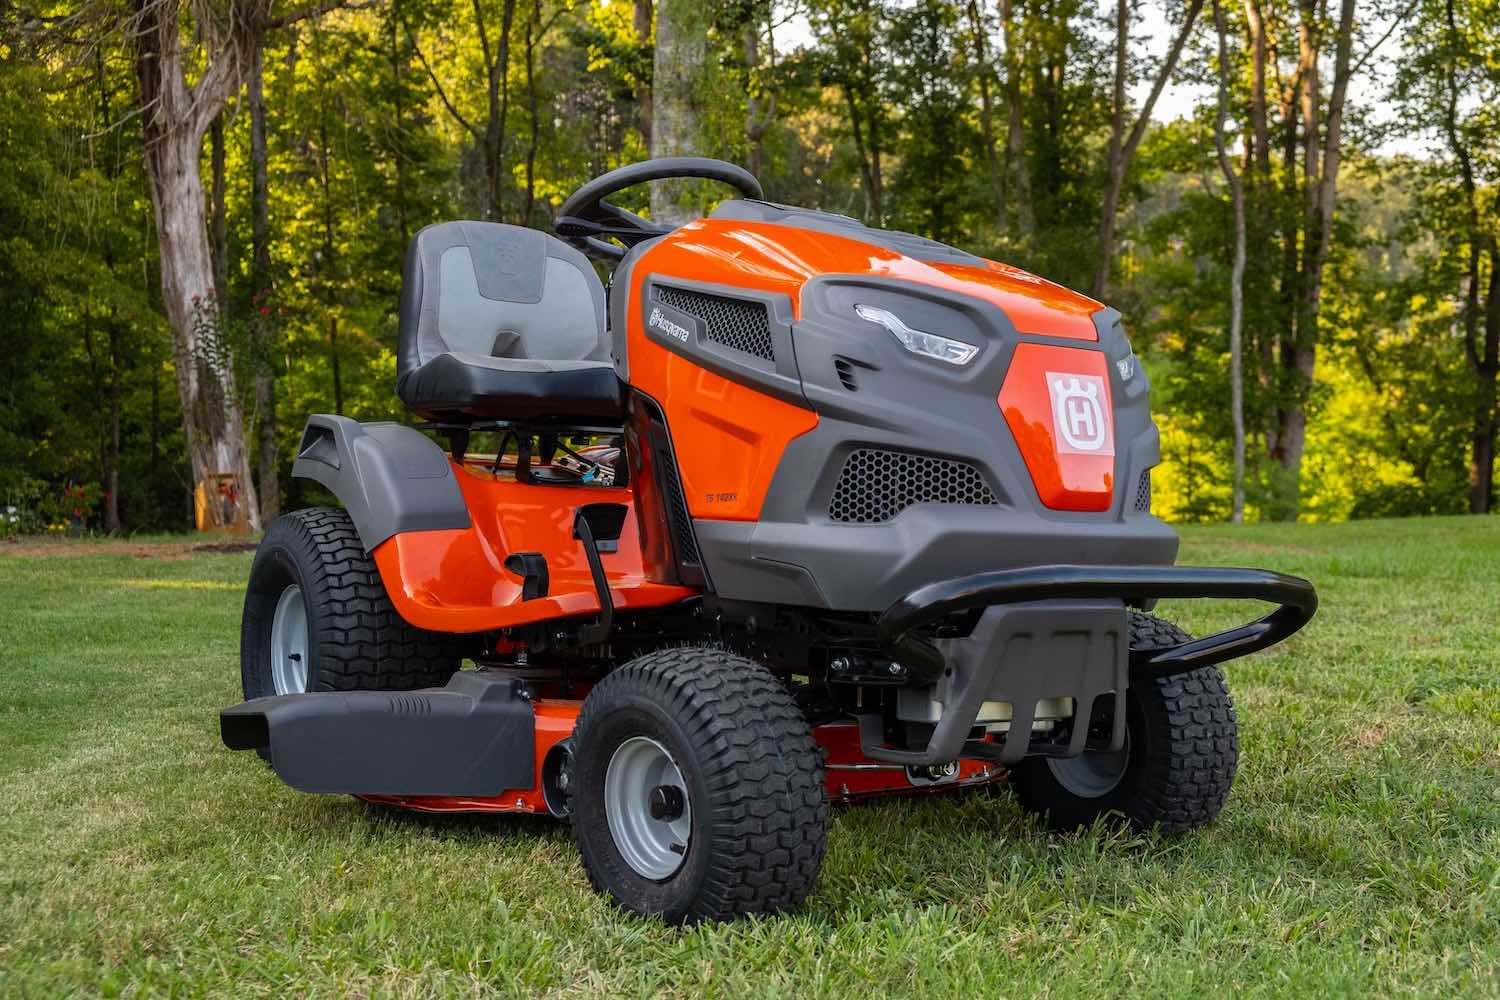 An orange lawn tractor parked in front of a row of trees.